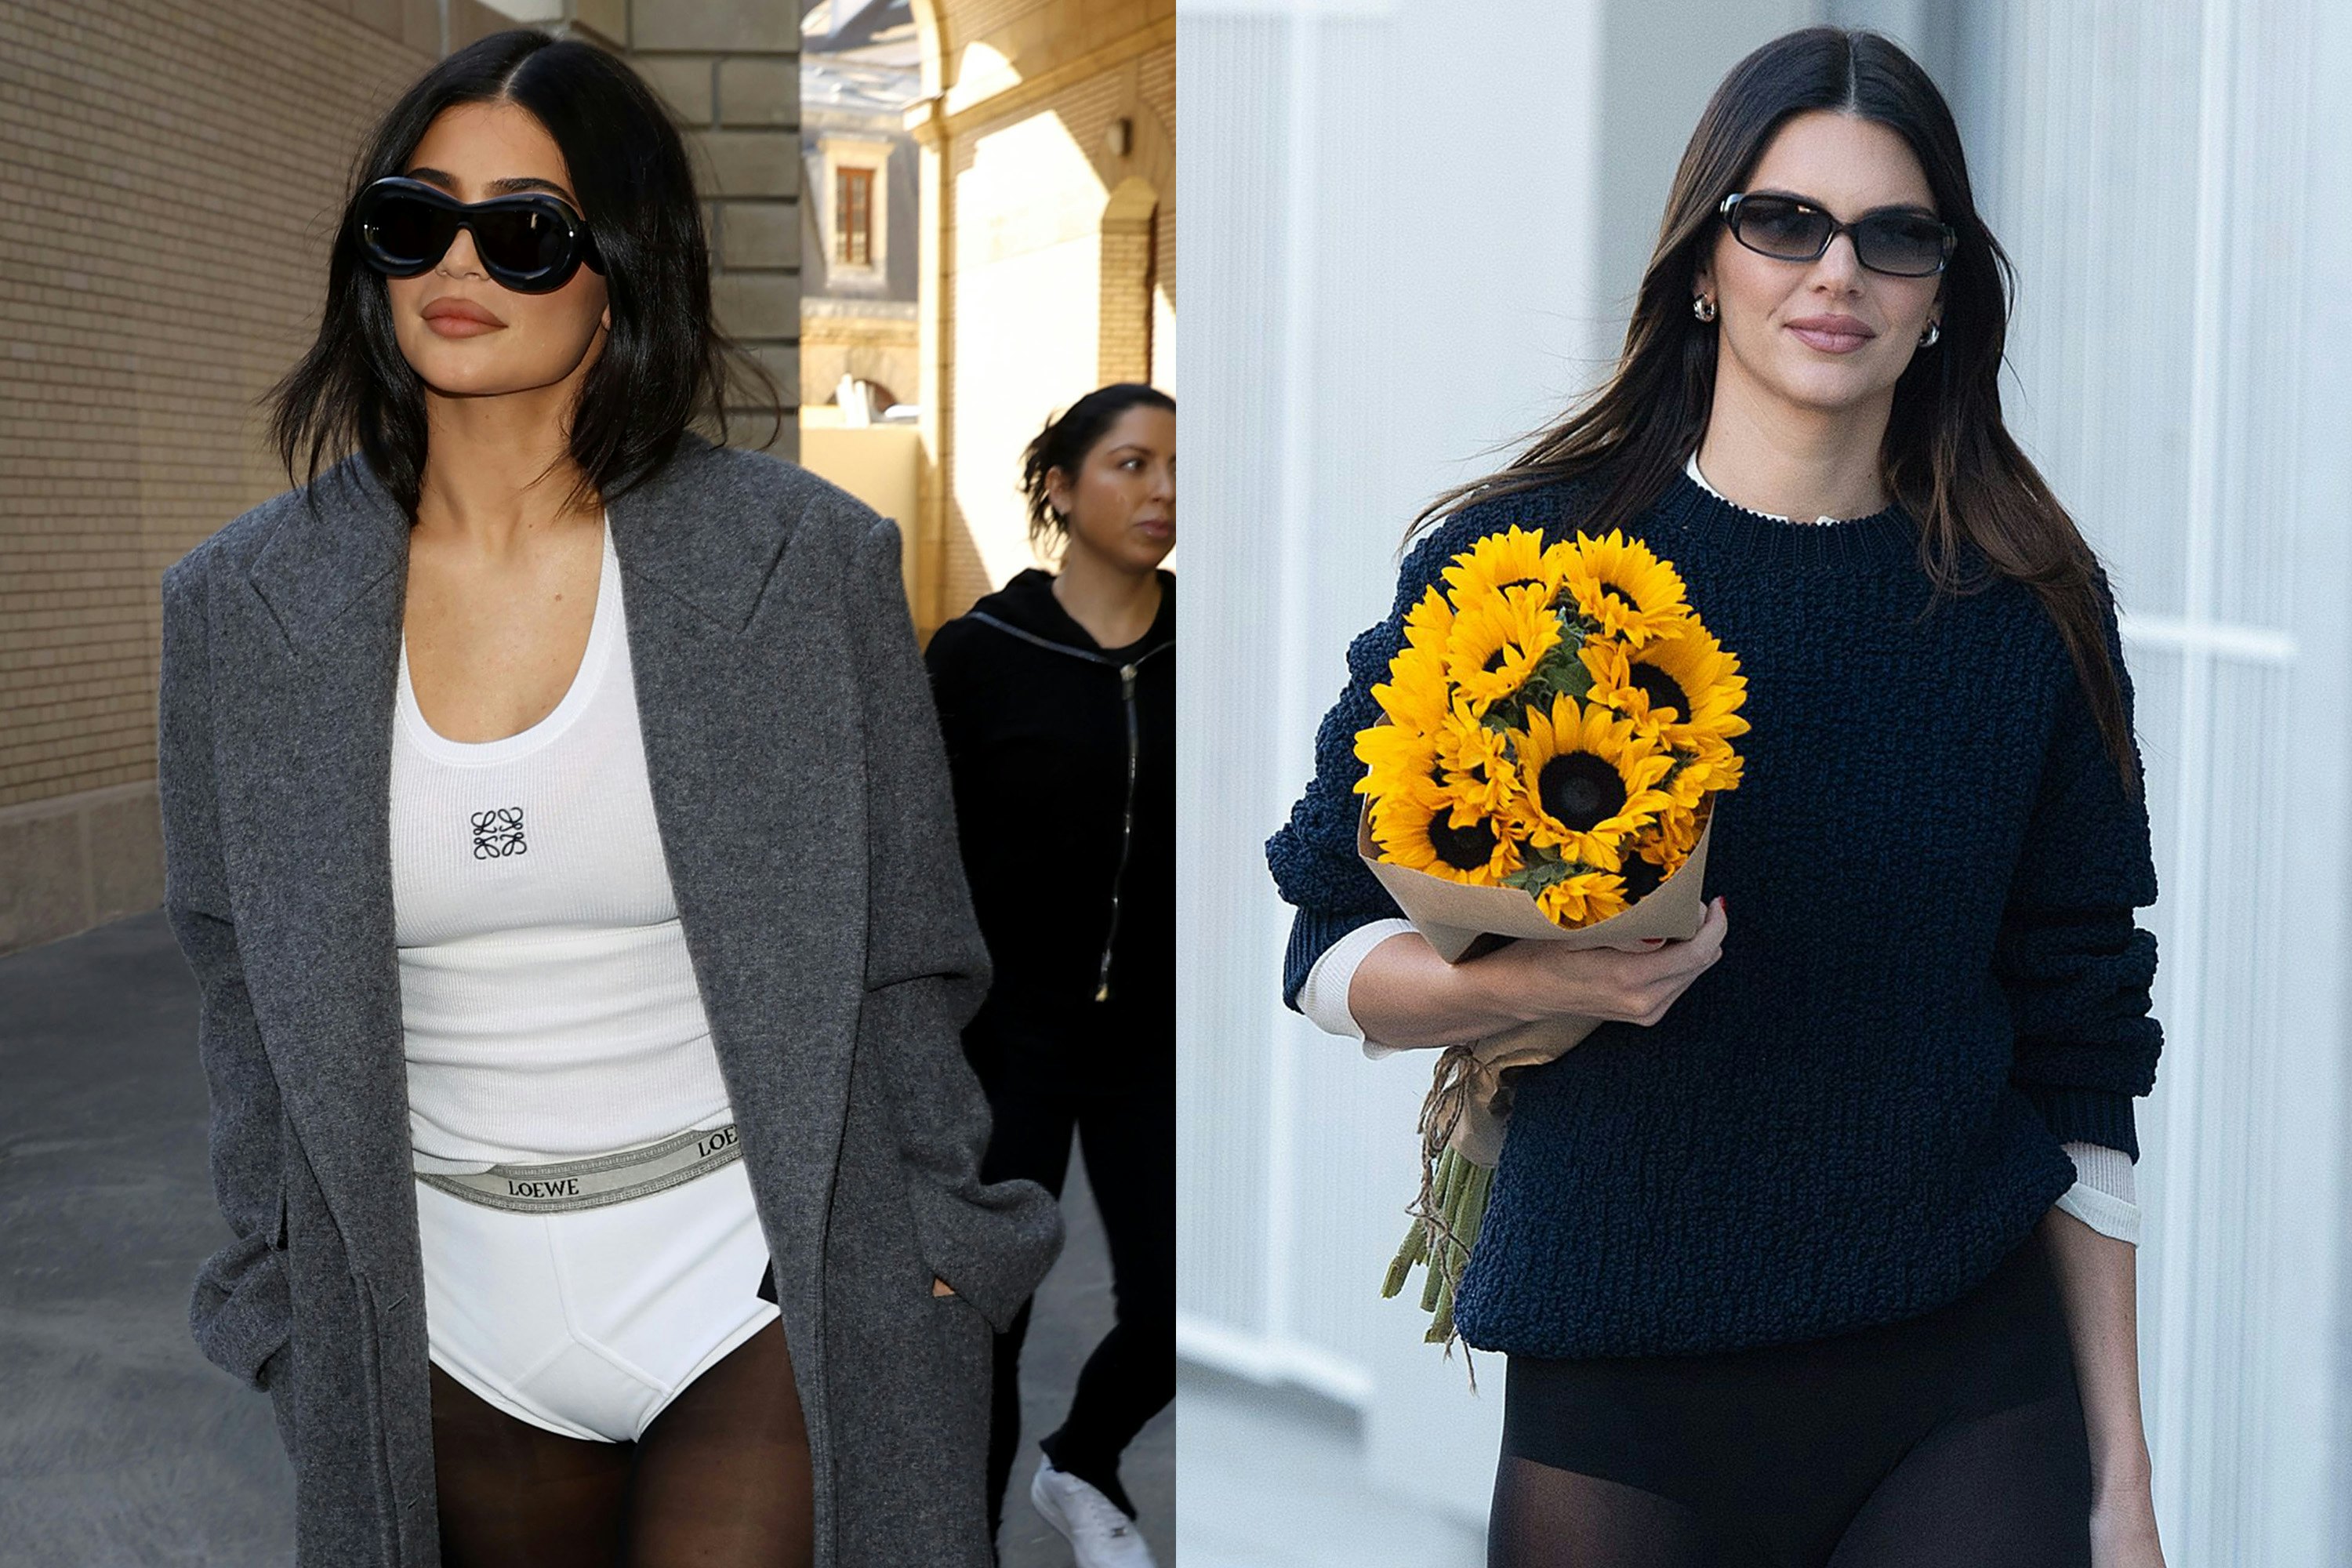 Kendall and Kylie Jenner Both Wear Tights as Pants